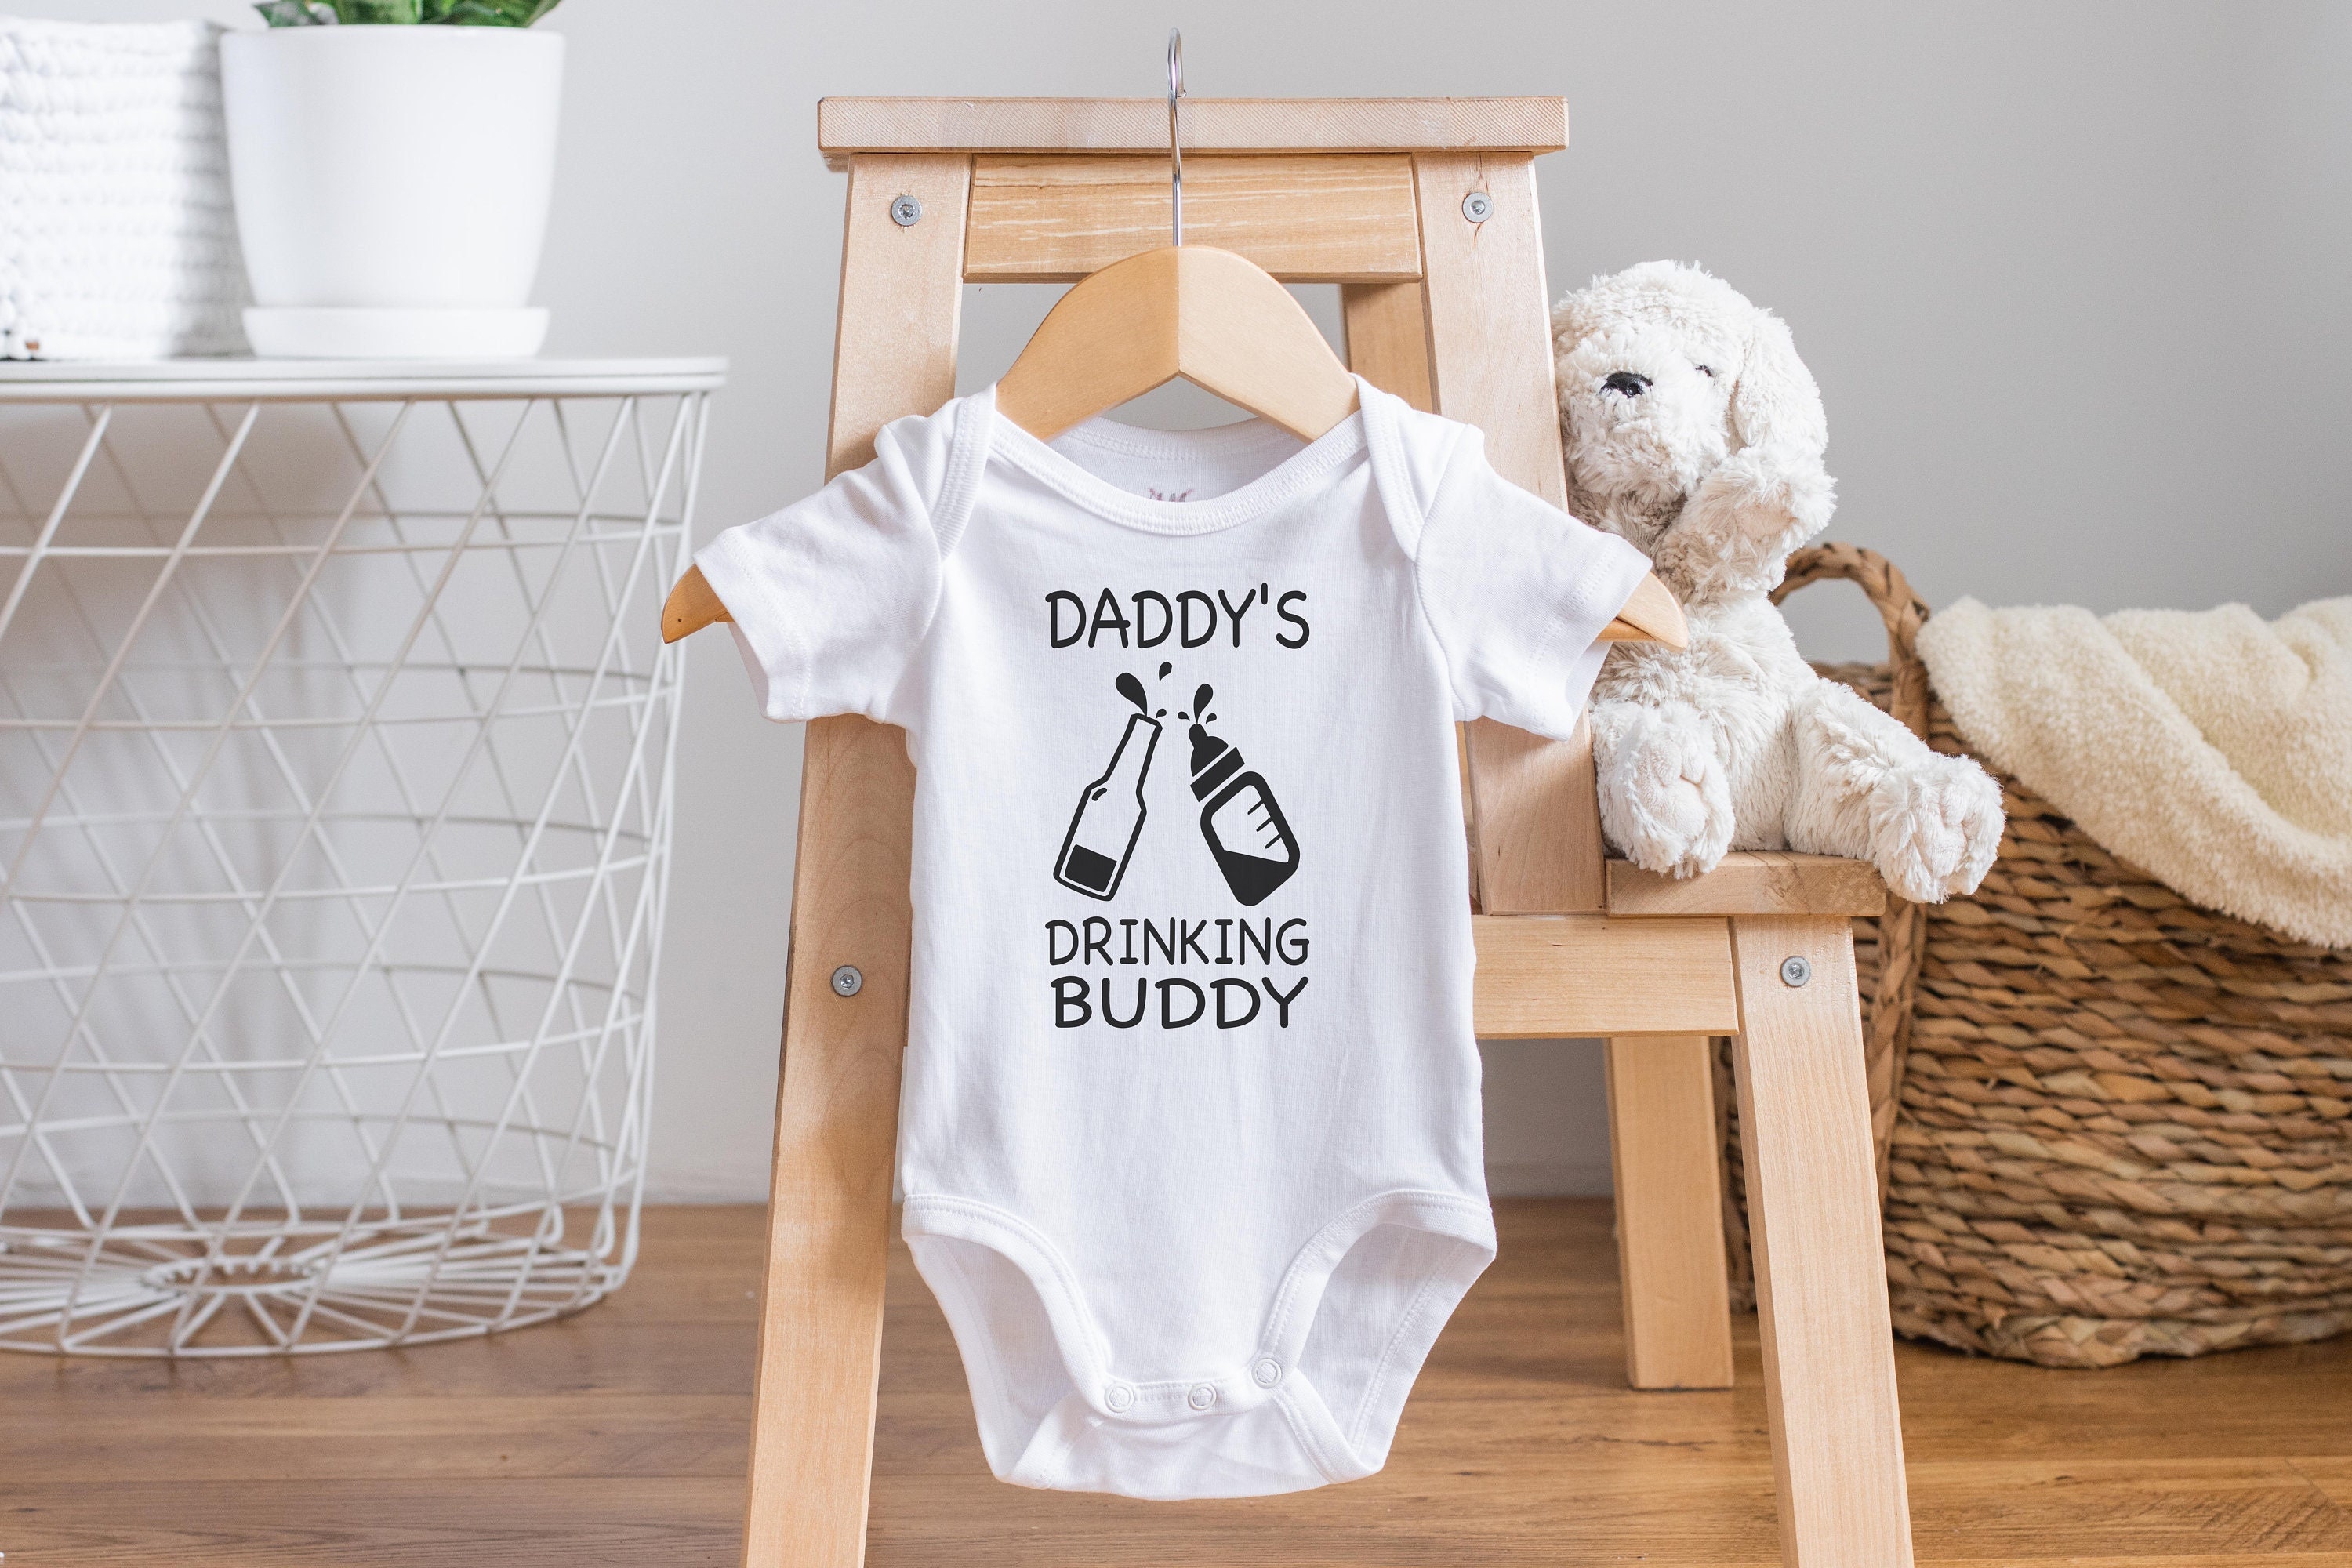 Drinking Buddy Onesie®, Funny Baby Onesie®, I Love Daddy Onesie®, Beer  Onesie®, Daddy Baby Clothes, Baby Shower Gift, Cute Baby Clothes 